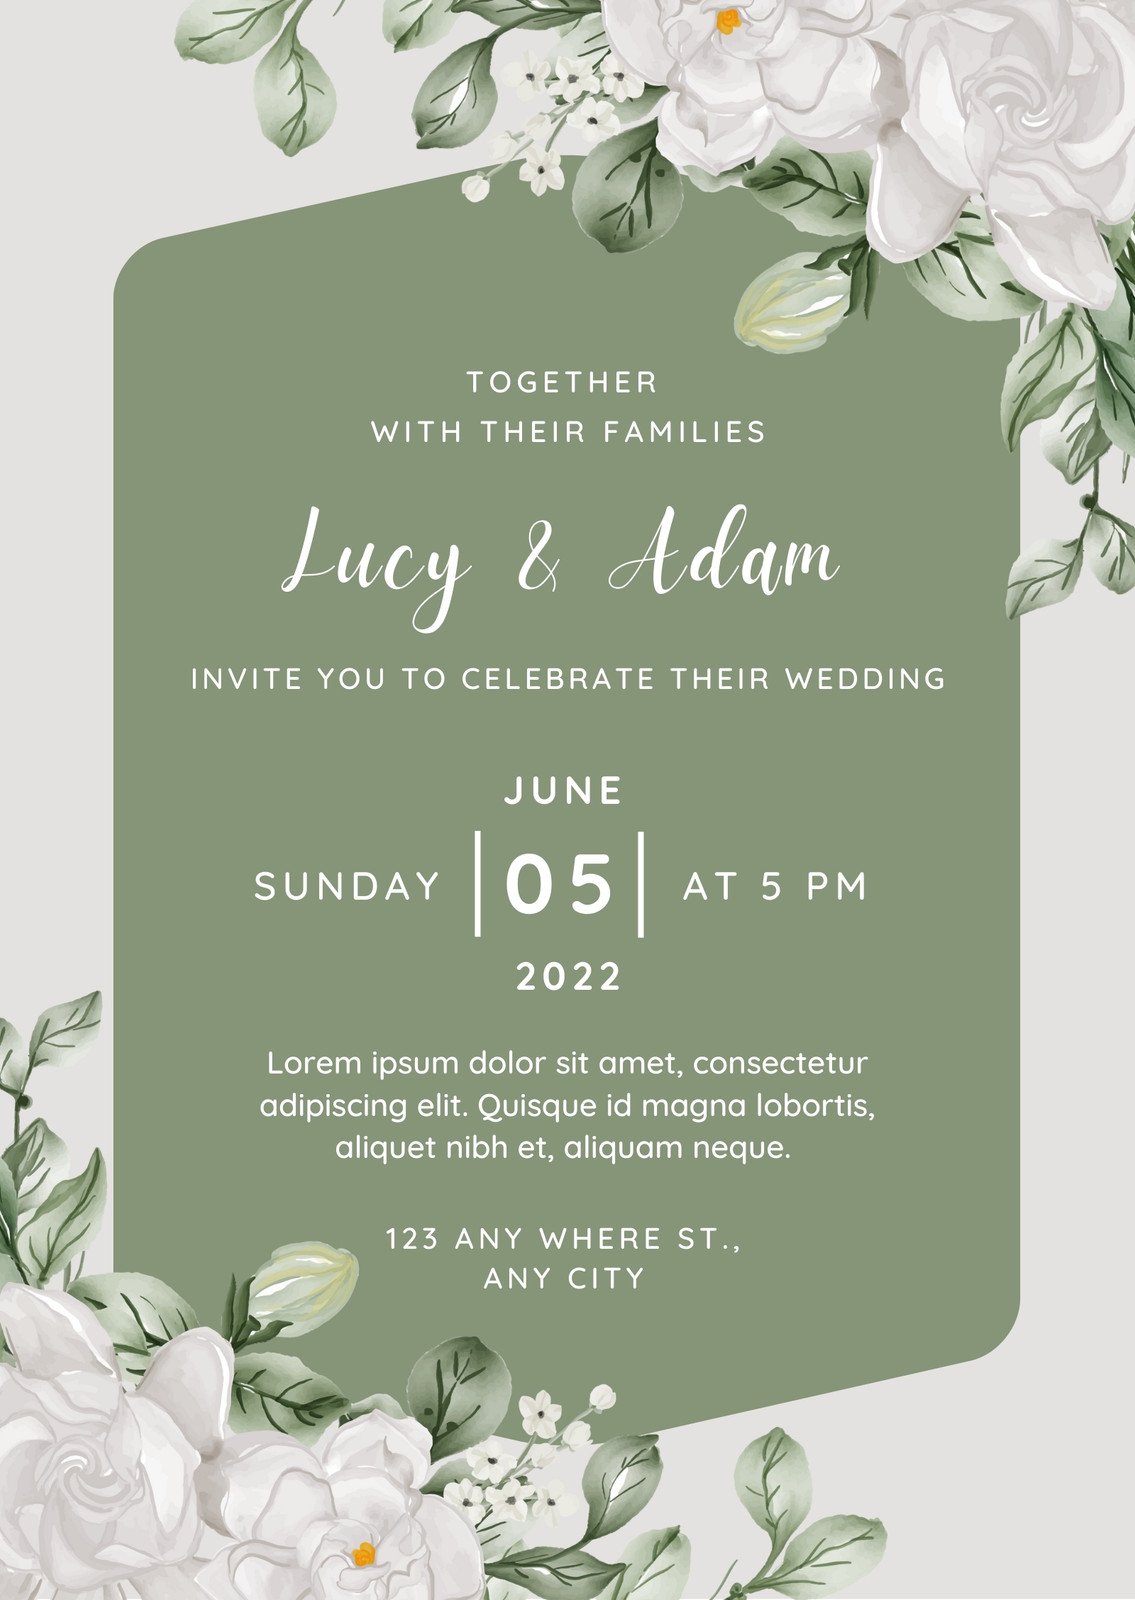 wedding invitation templates to customize for free | canva